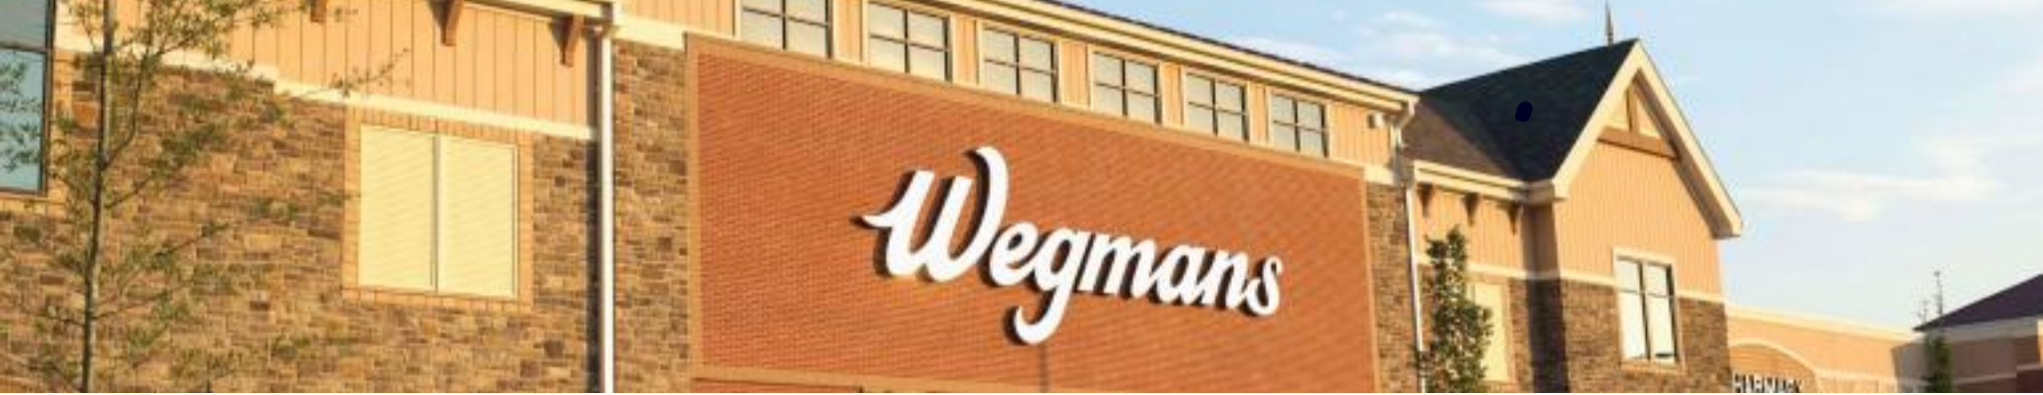 grocer shopping, grocery shopping list, grocery shopping online, grocery shopping app, grocery shopping on a budget, grocery shops near me, wegmans catering, wegmans bakery wegmans near me  